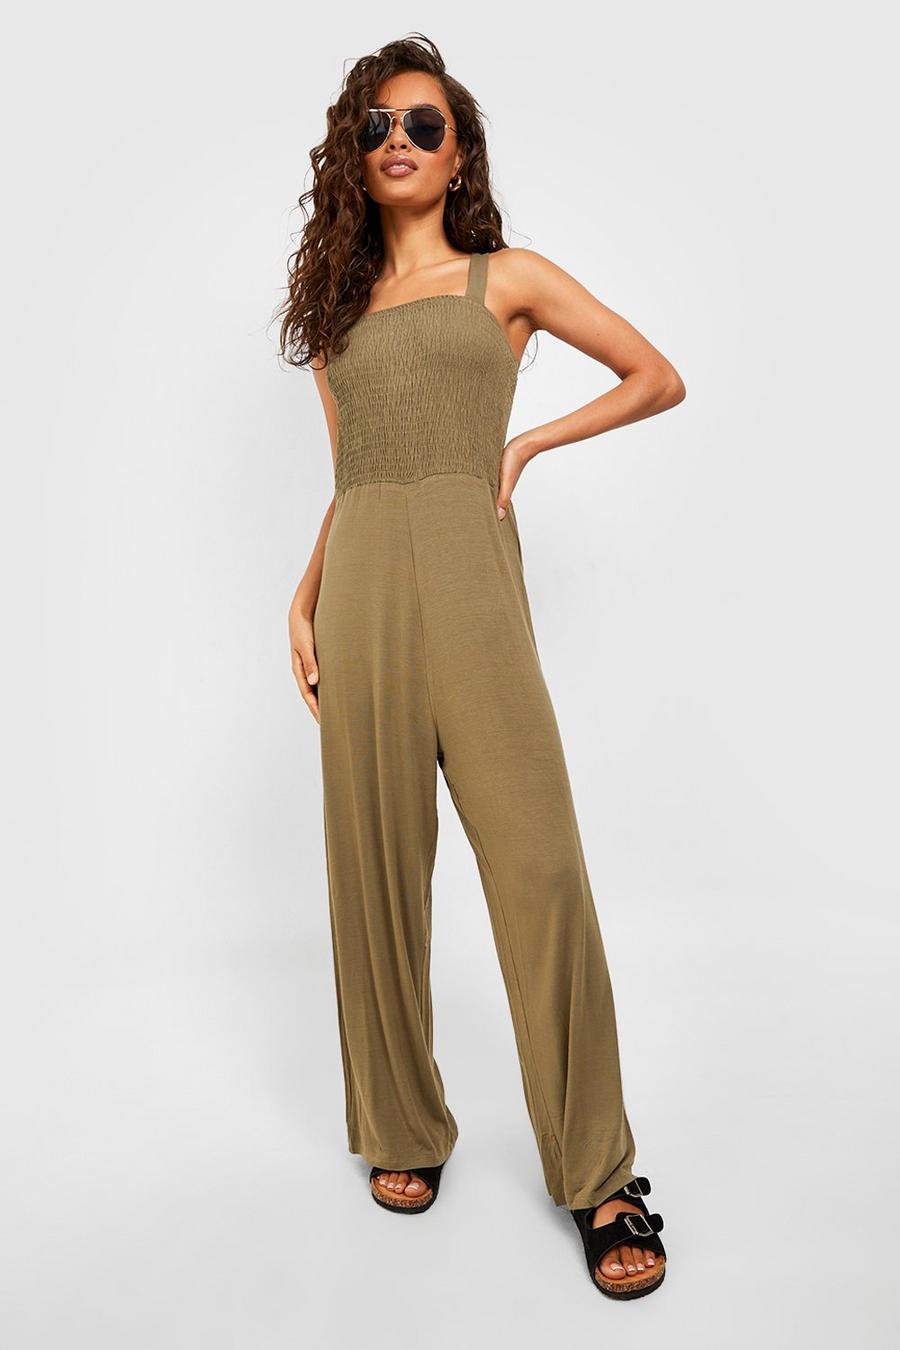 Khaki Strappy Shirred Top Jumpsuit